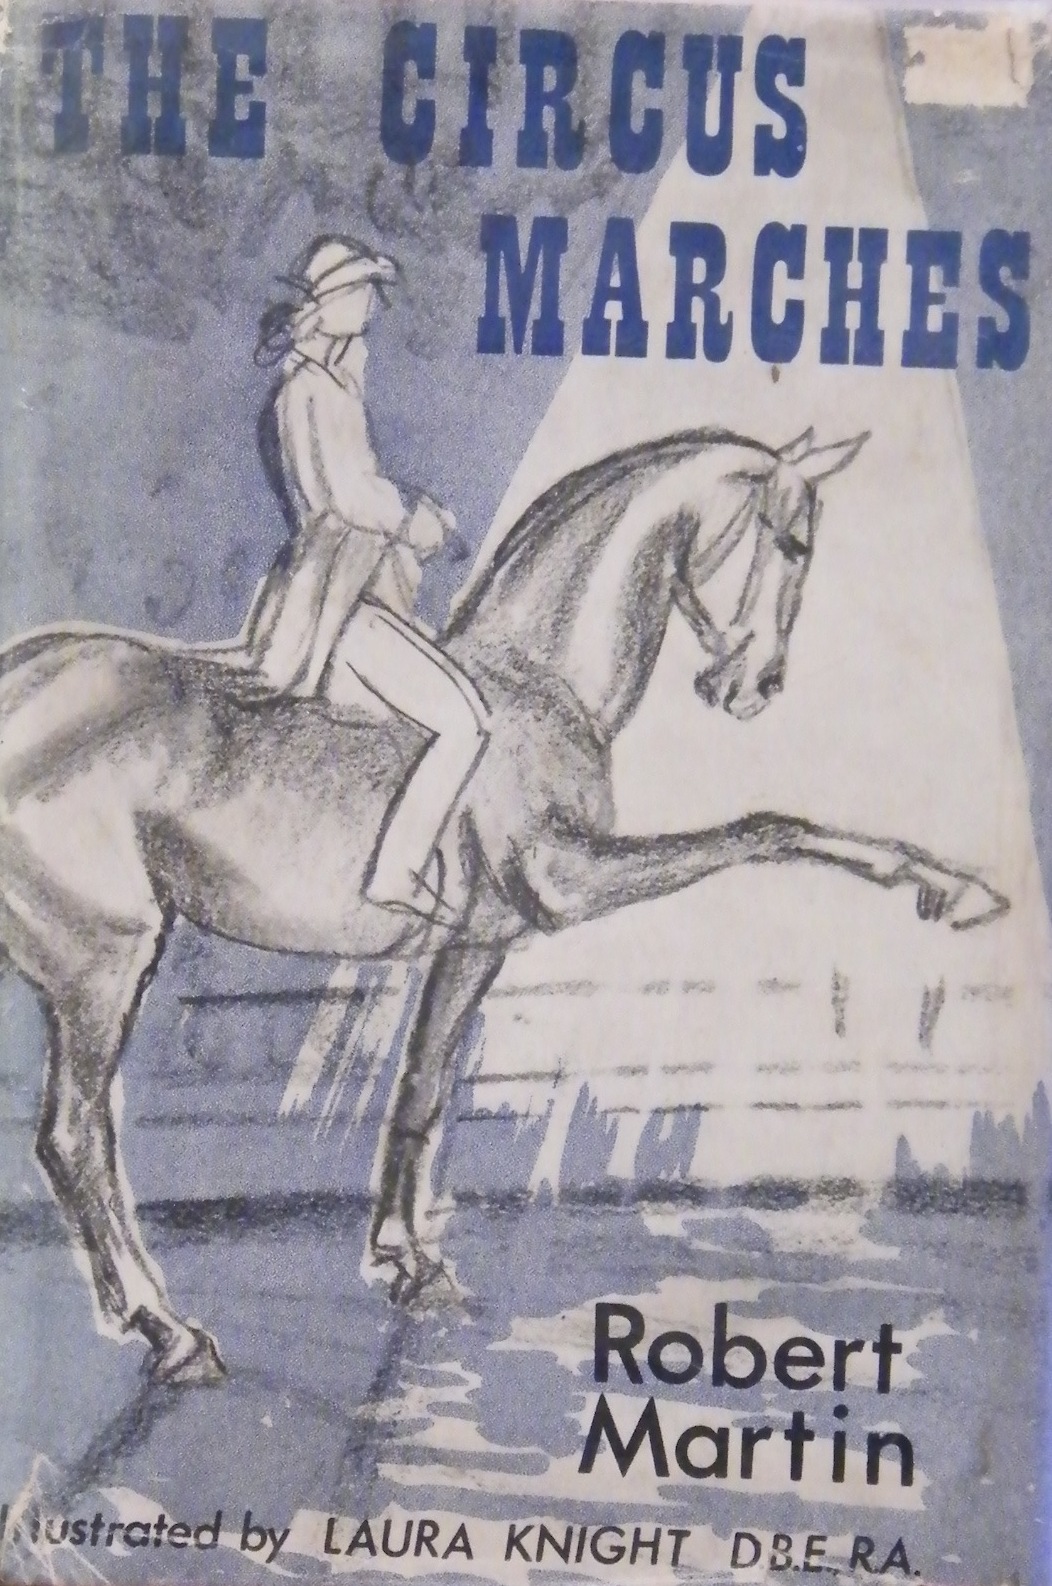 DAME LAURA KNIGHT R.A.
"The Circus Marches" 
A book by Robert Martin
with illustrations by the